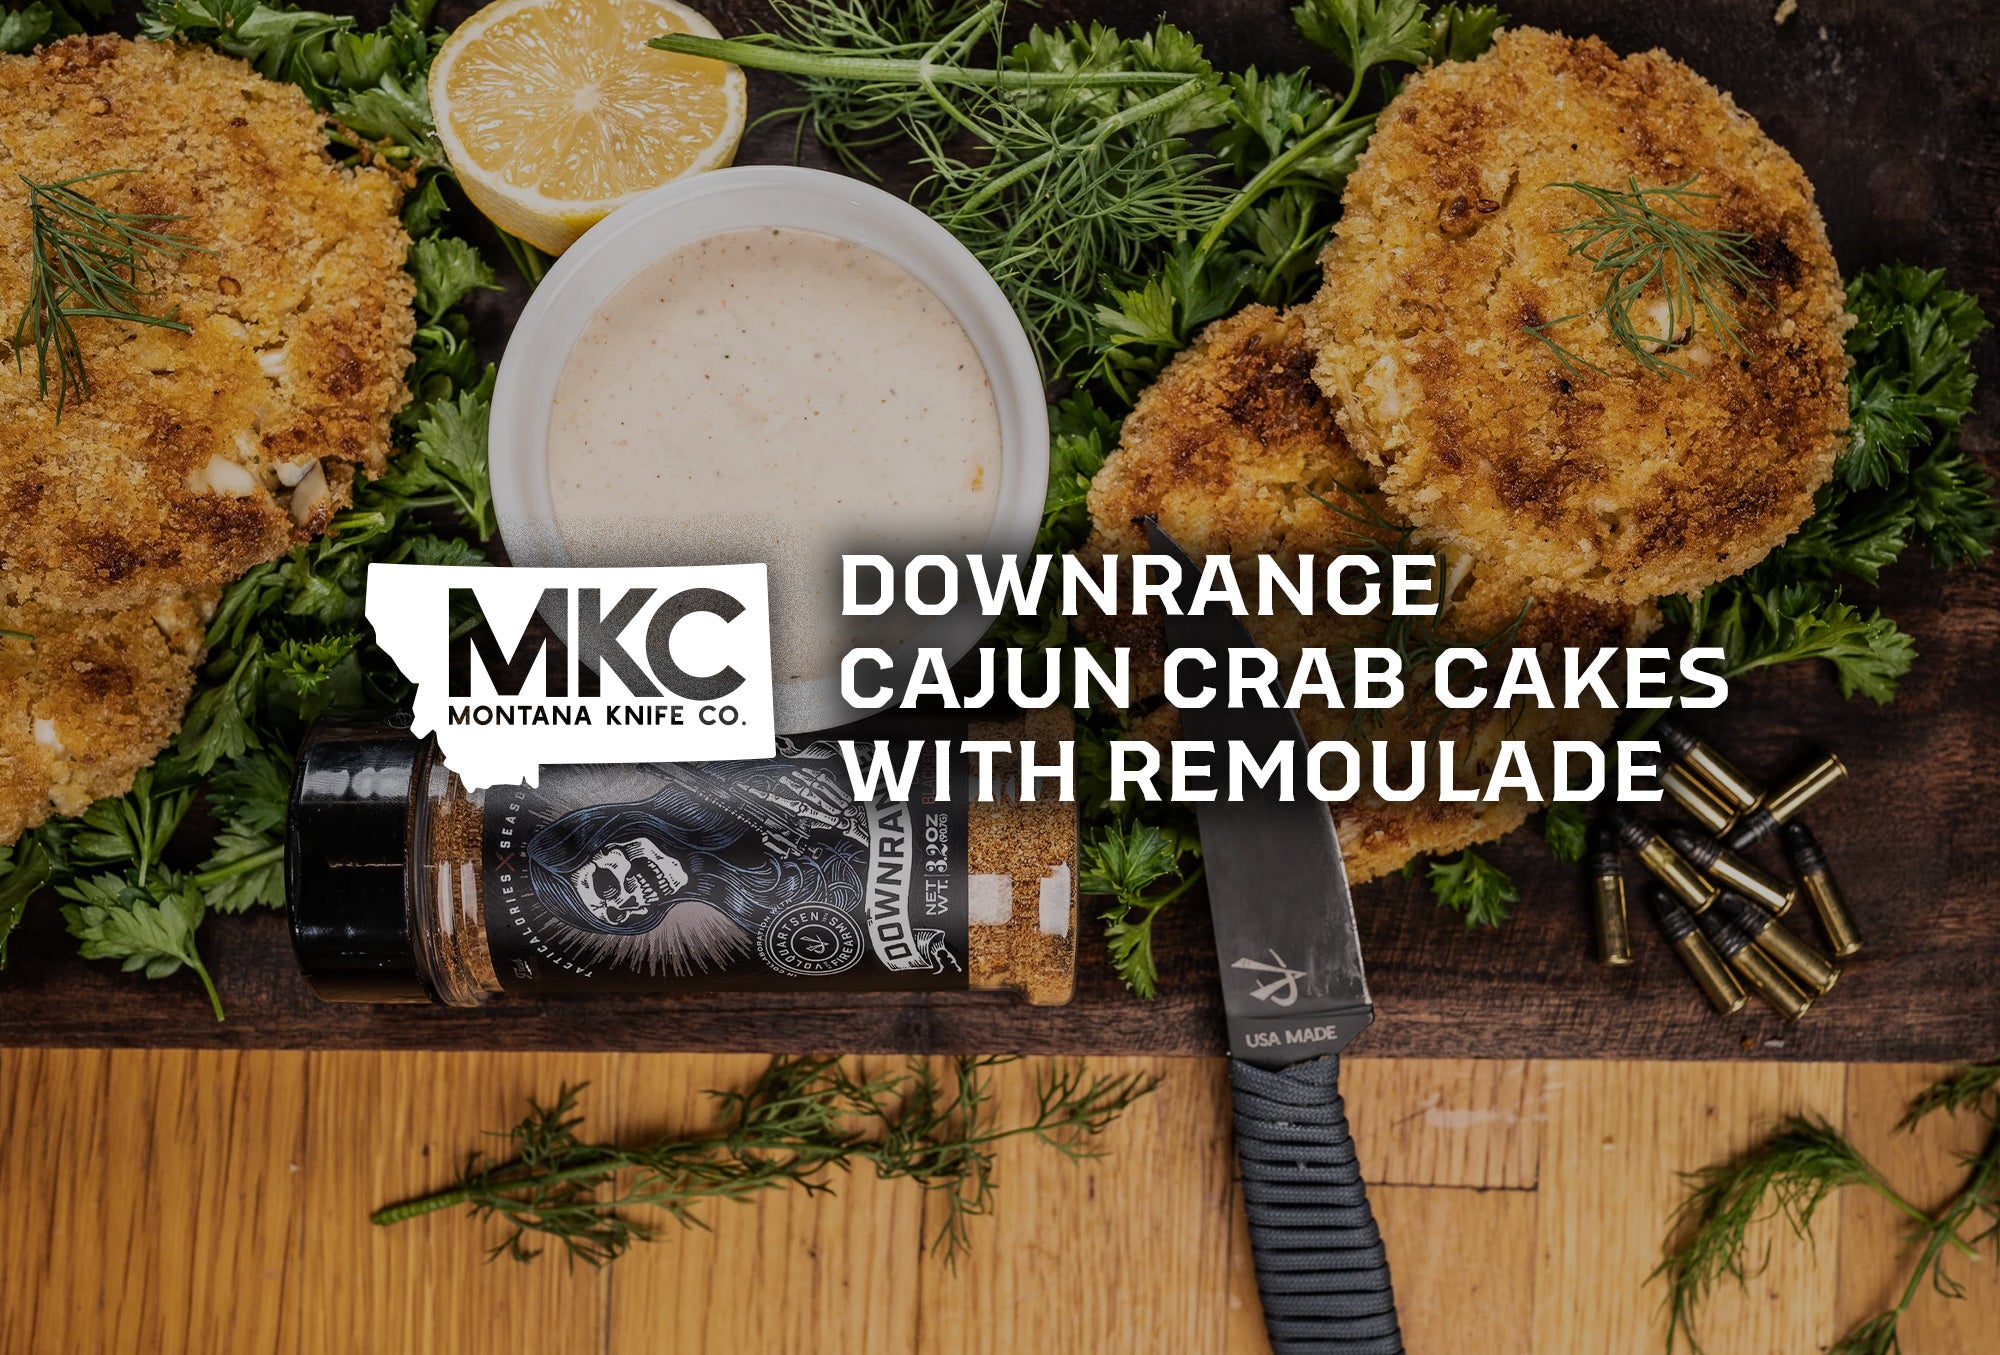 Golden-brown Cajun crab cakes with creamy remoulade, surrounded by fresh herbs, lemon, and a Montana Knife Company blade.